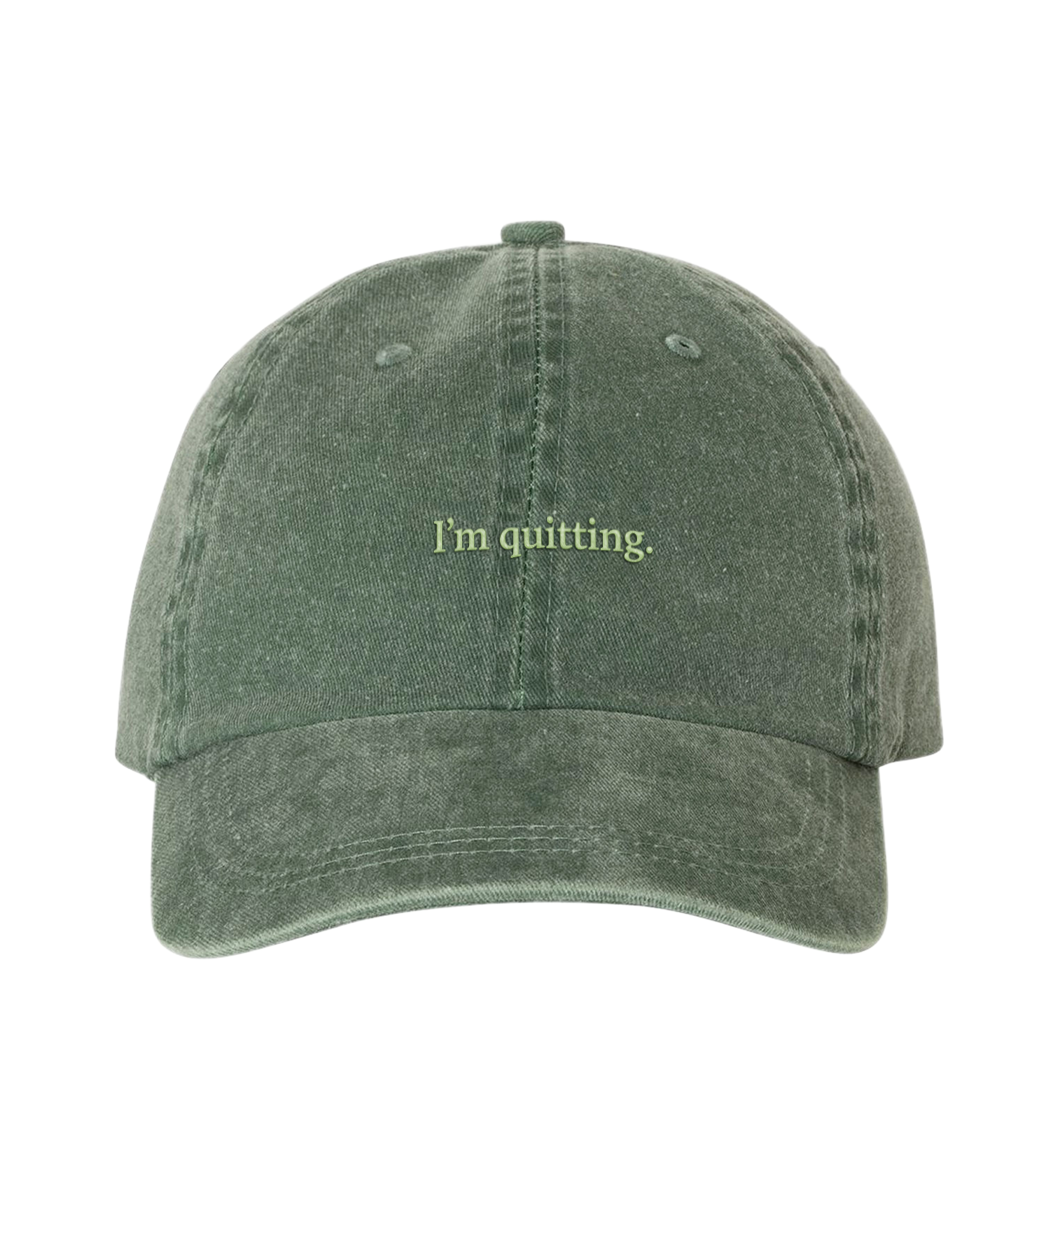 Green hat with “I’m qutting.” in green centered on front of hat - from Iz Harris